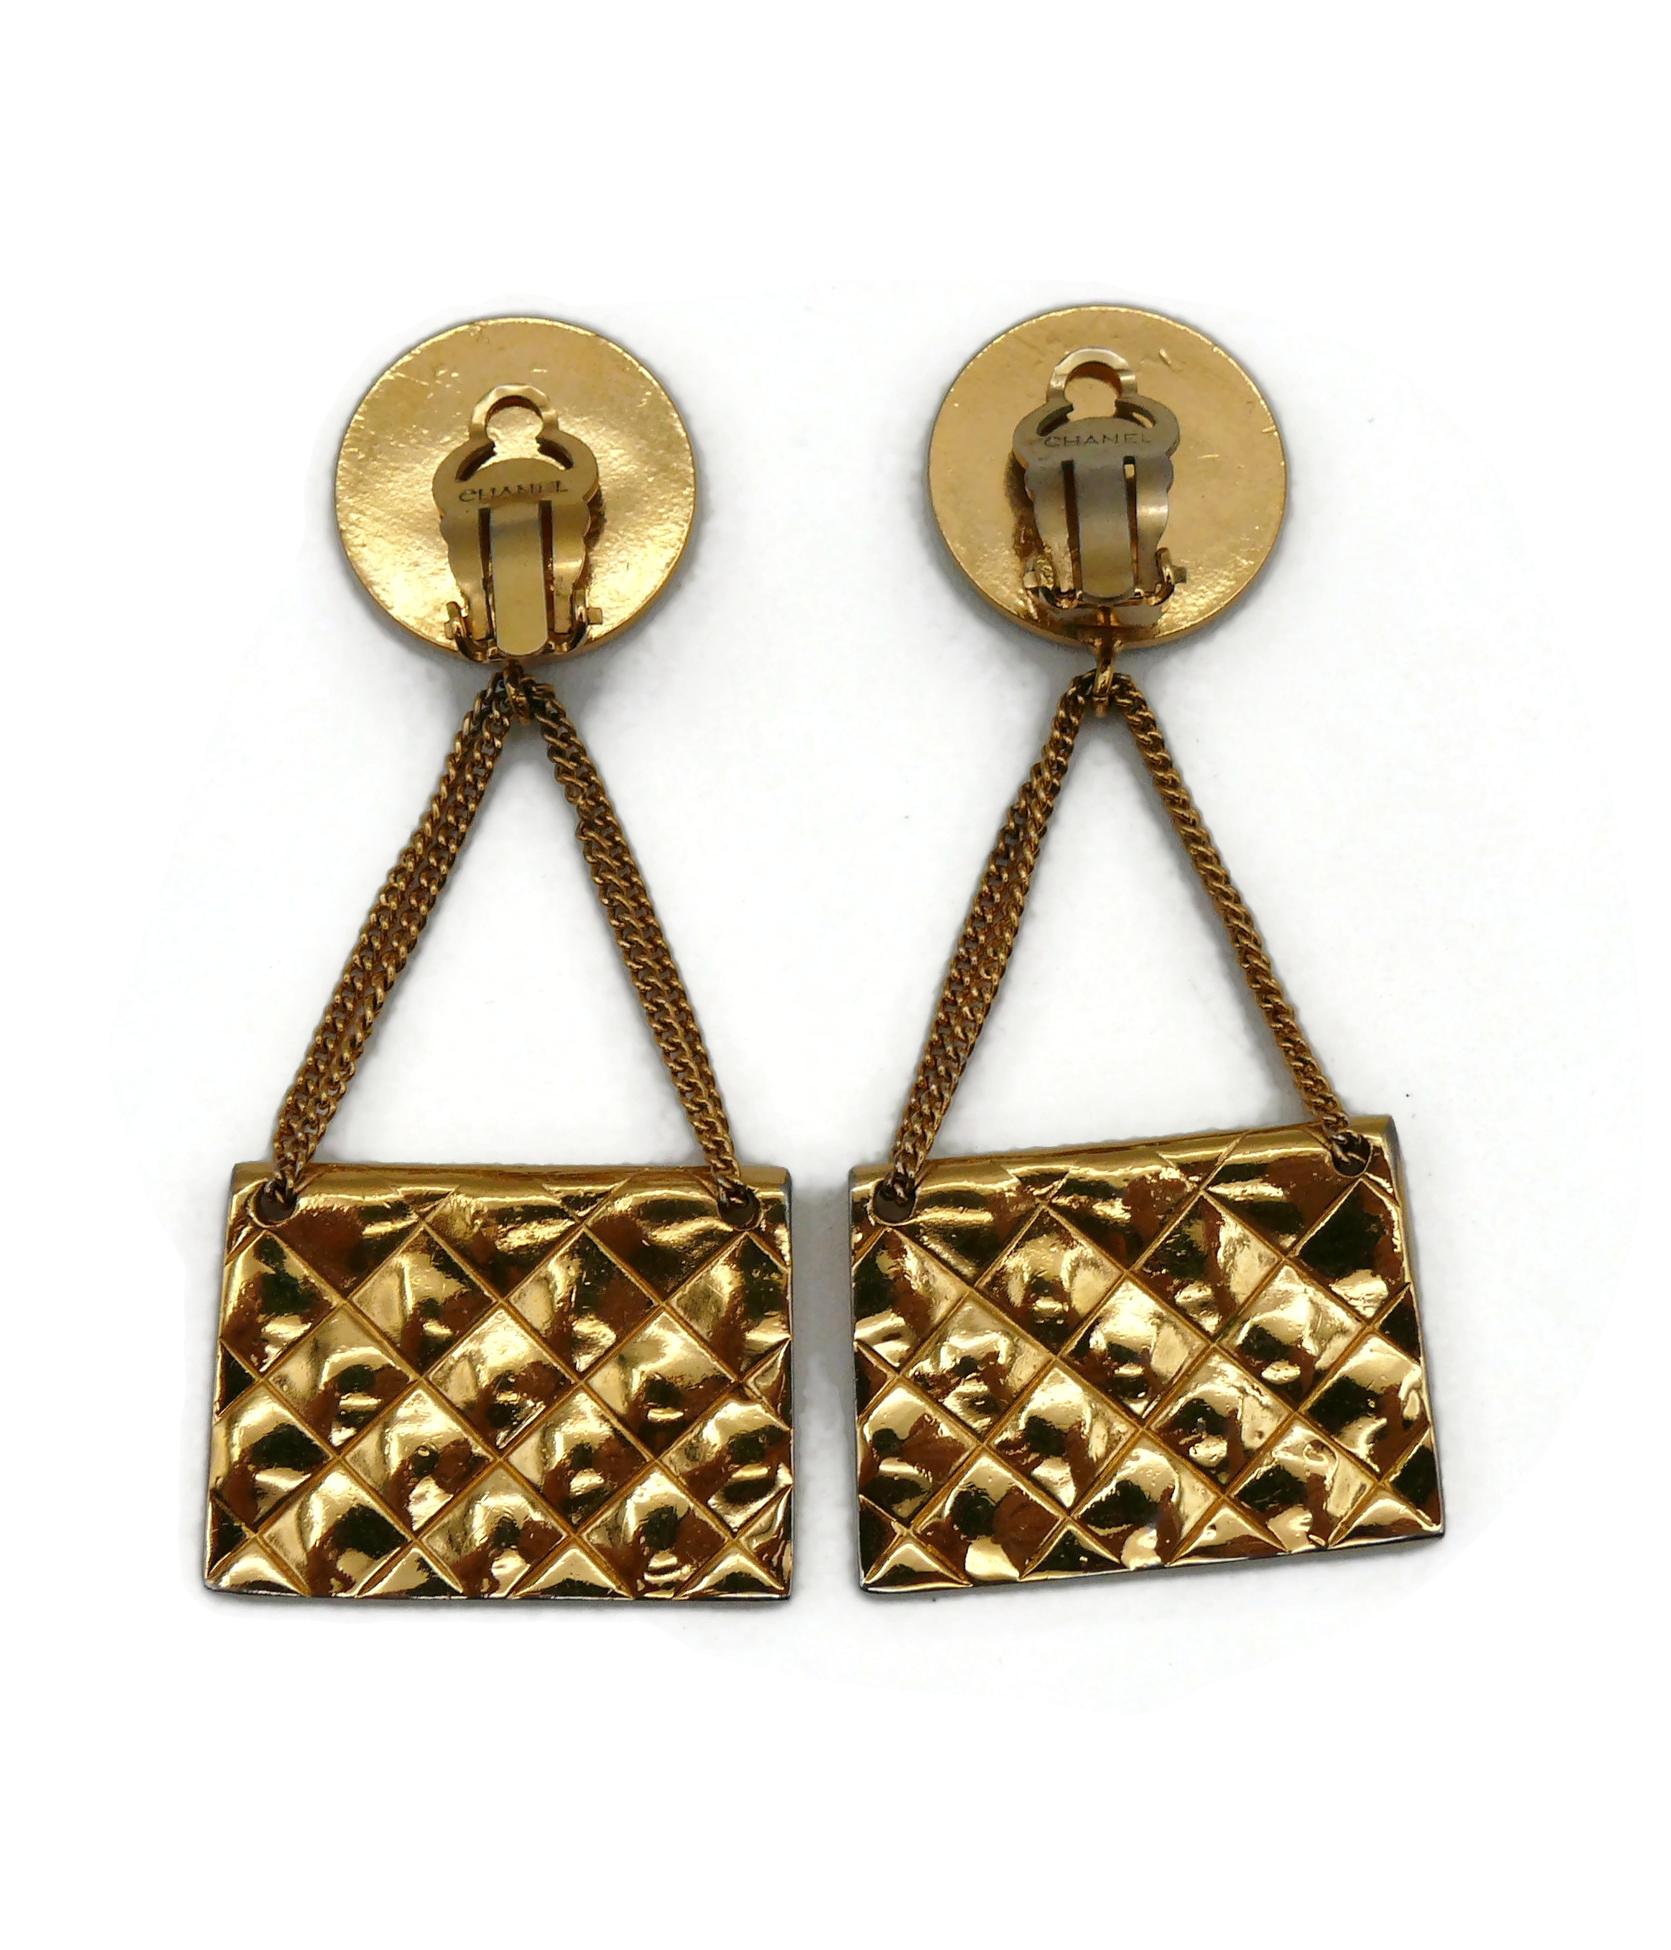 CHANEL Vintage Iconic Gold Tone Quilted Flap Bag Dangling Earrings For Sale 6